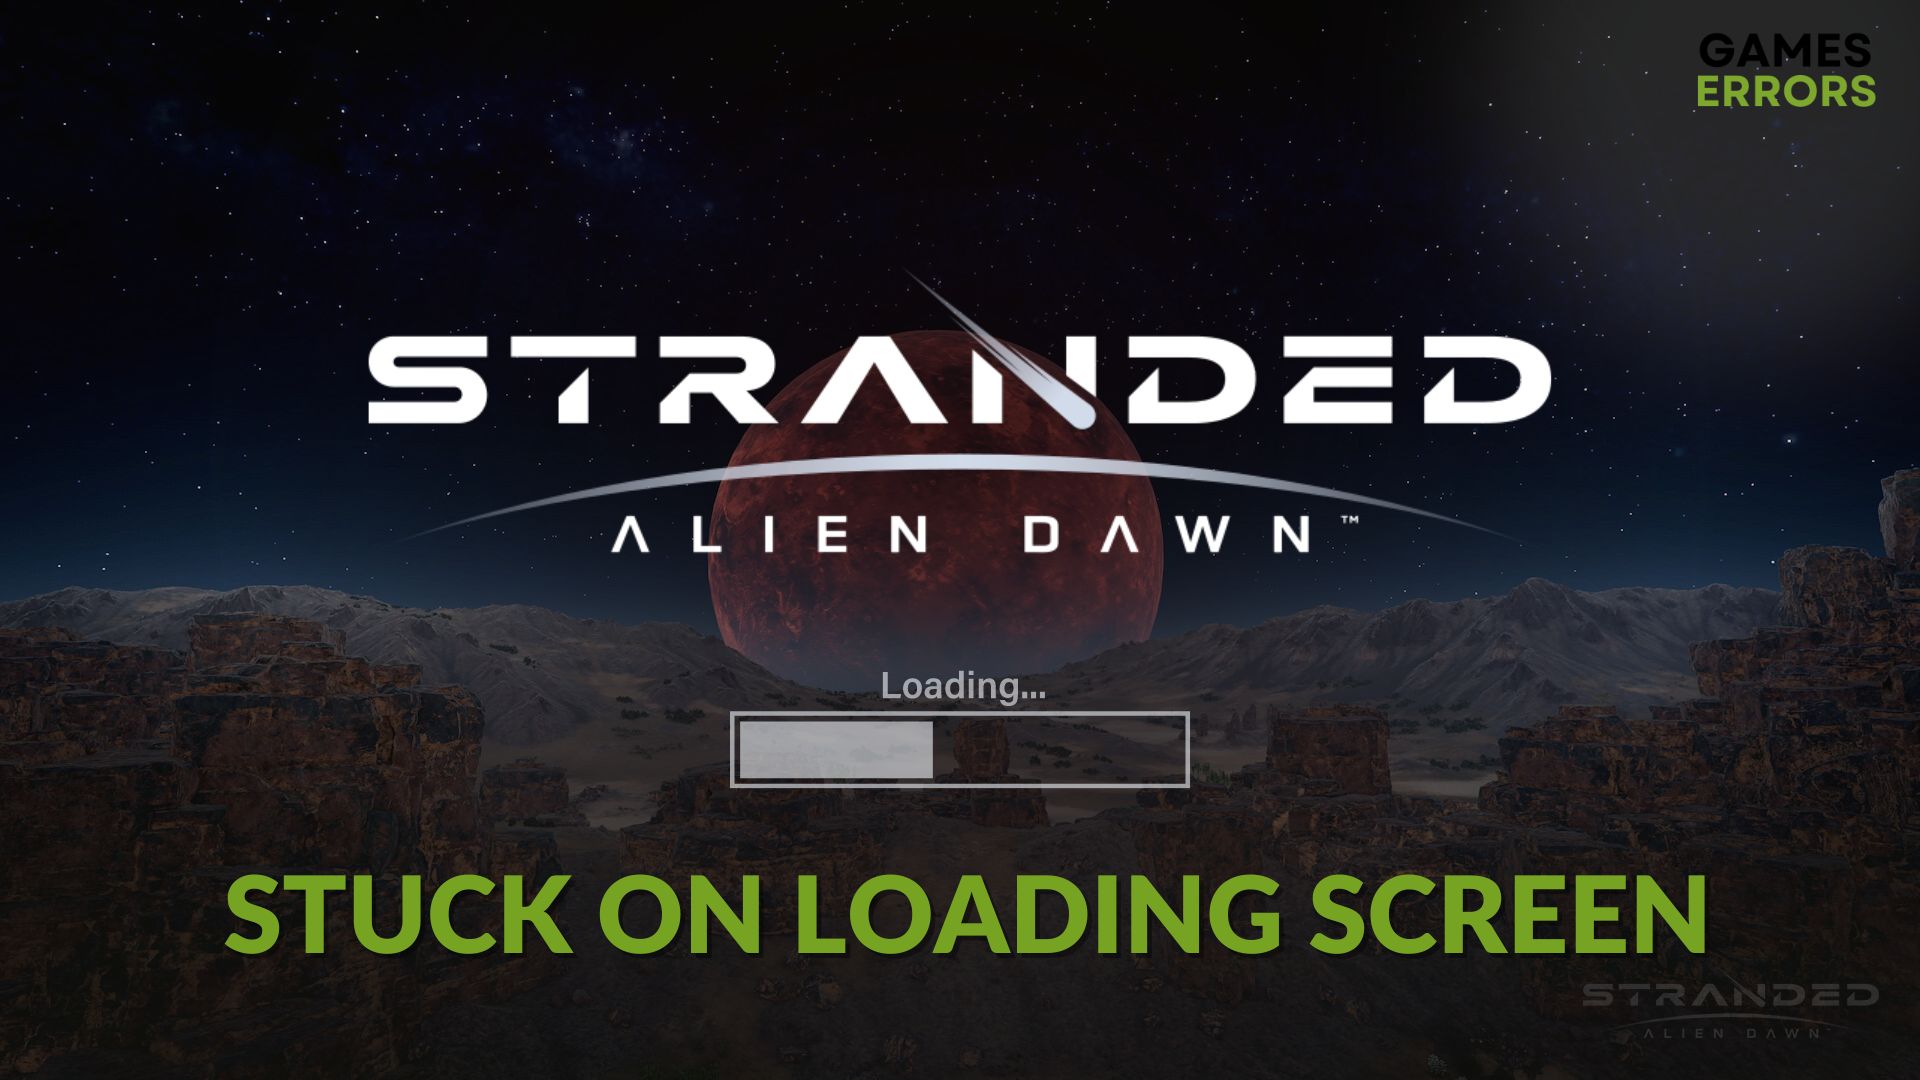 how to fix Stranded Alien Dawn stuck on loading screen